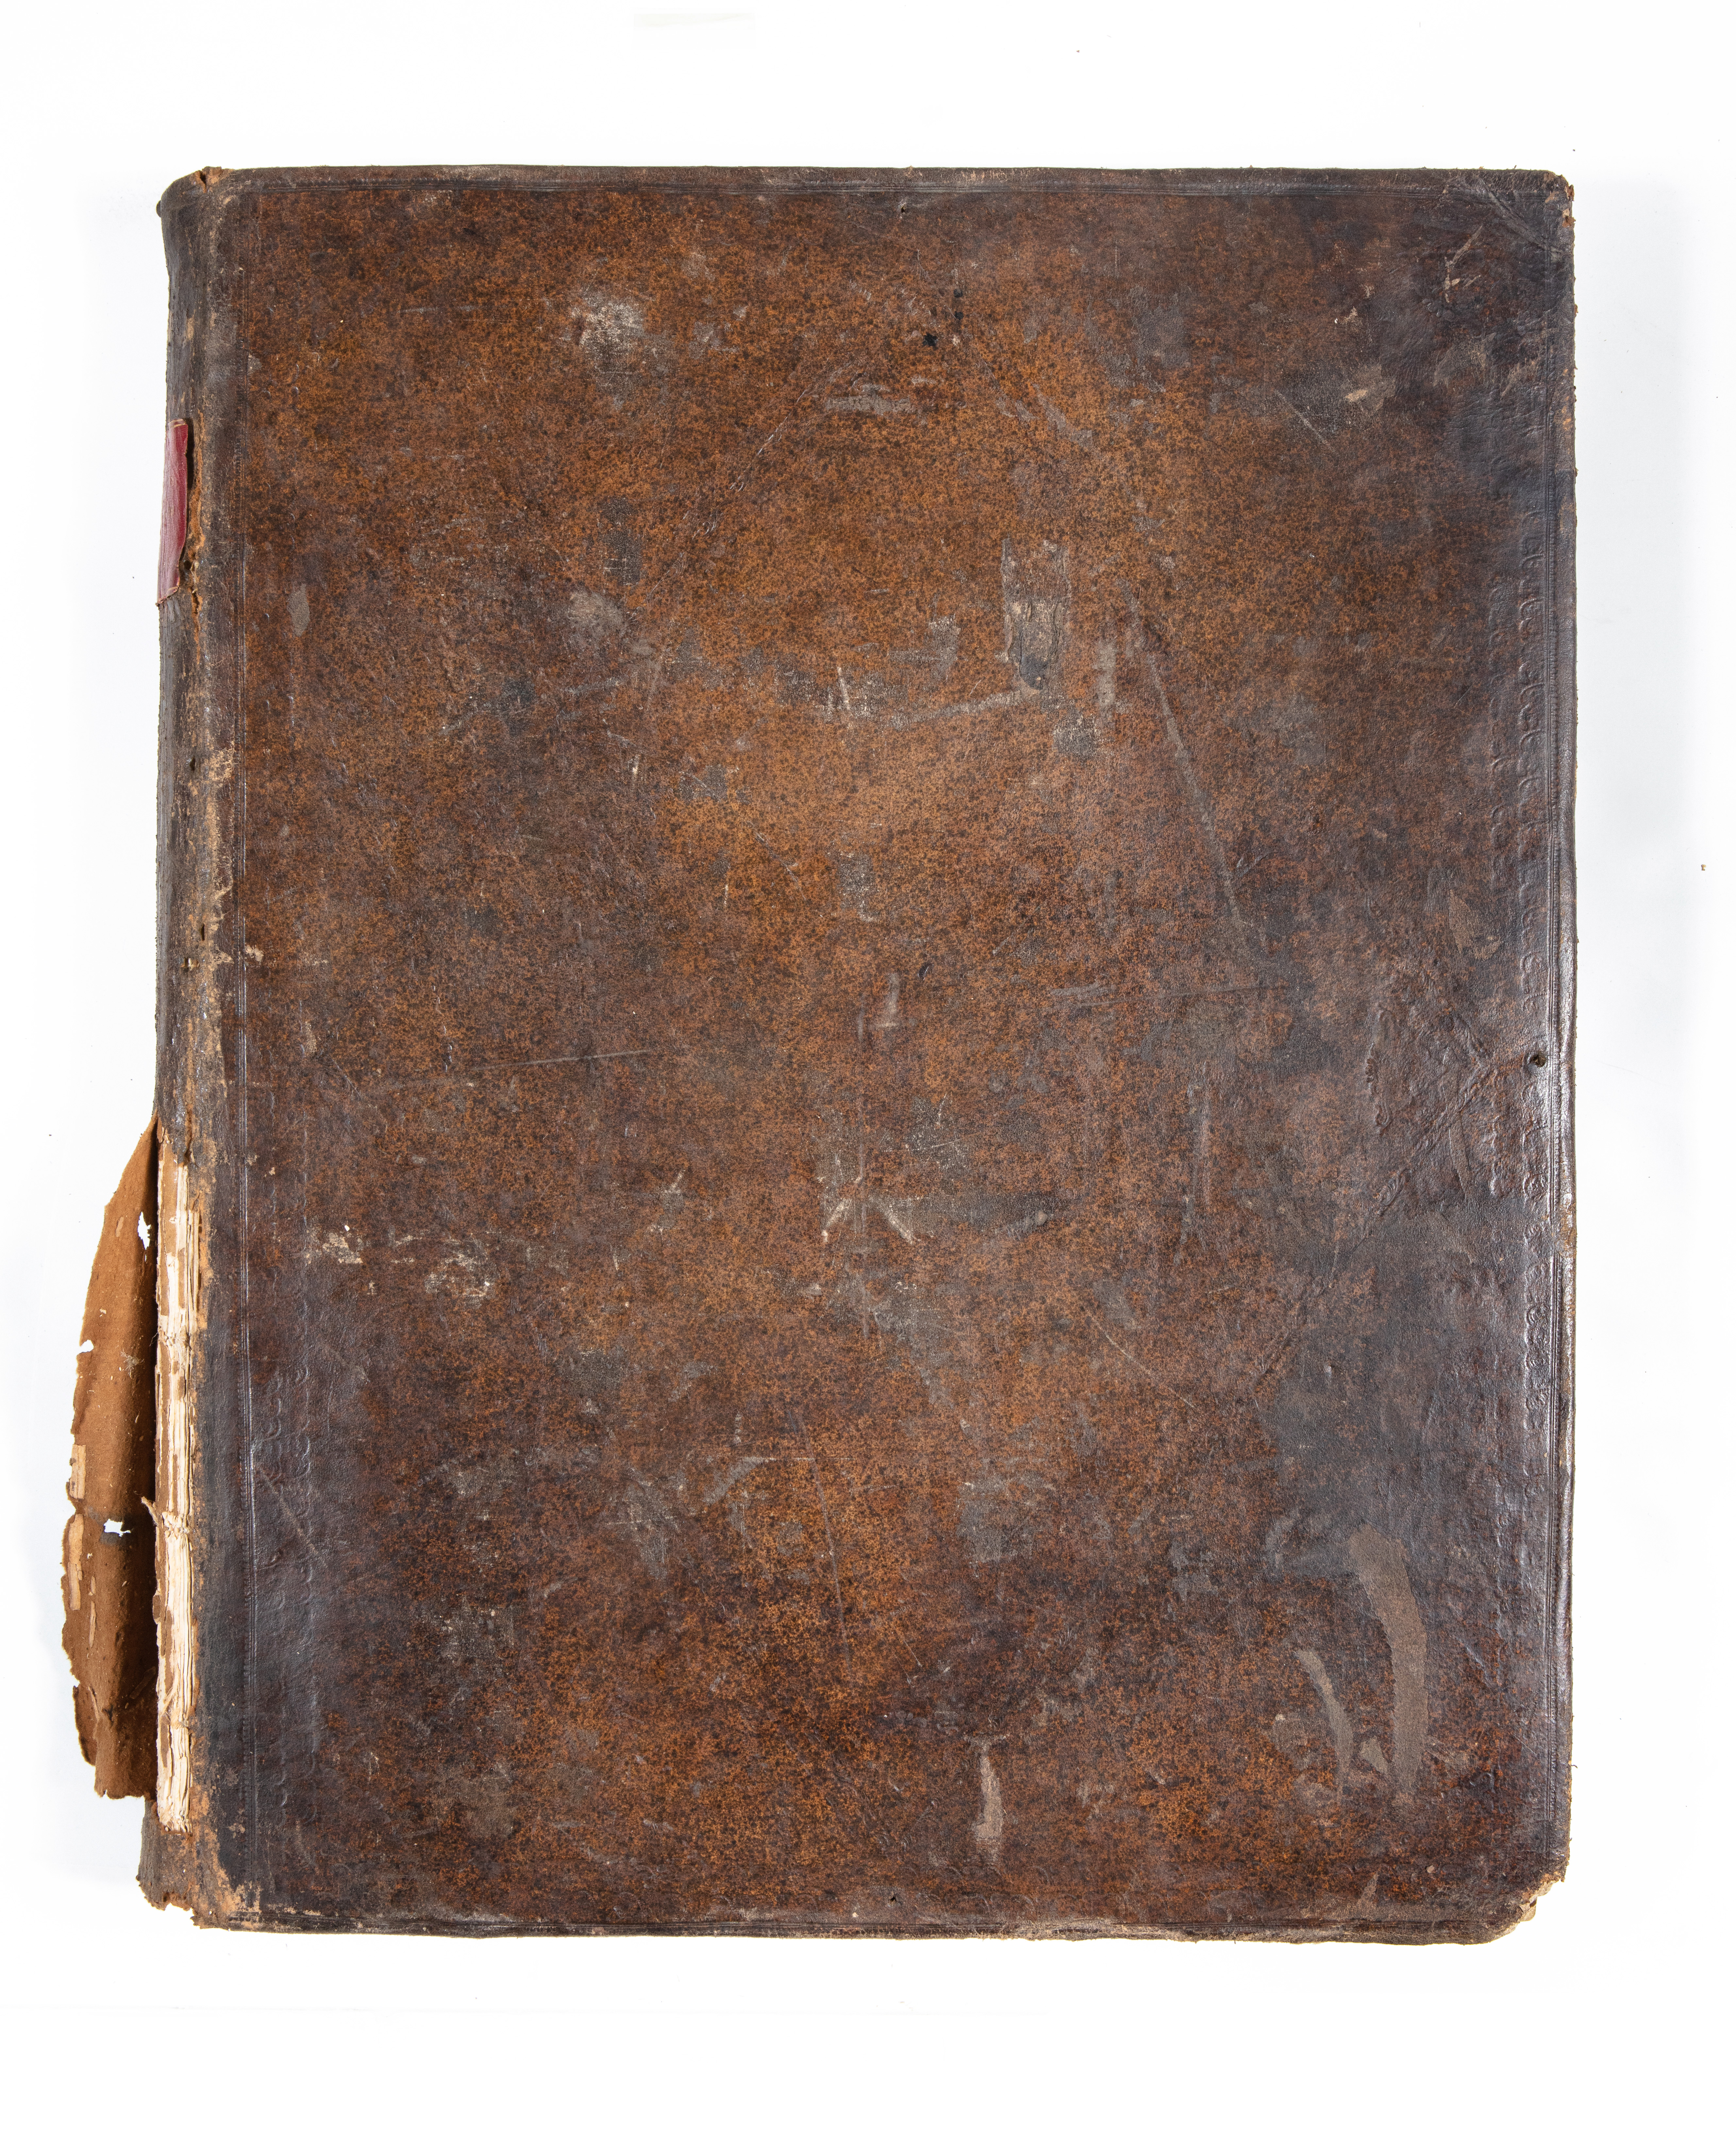 Visible reflectance photograph of front cover of the original leather binding